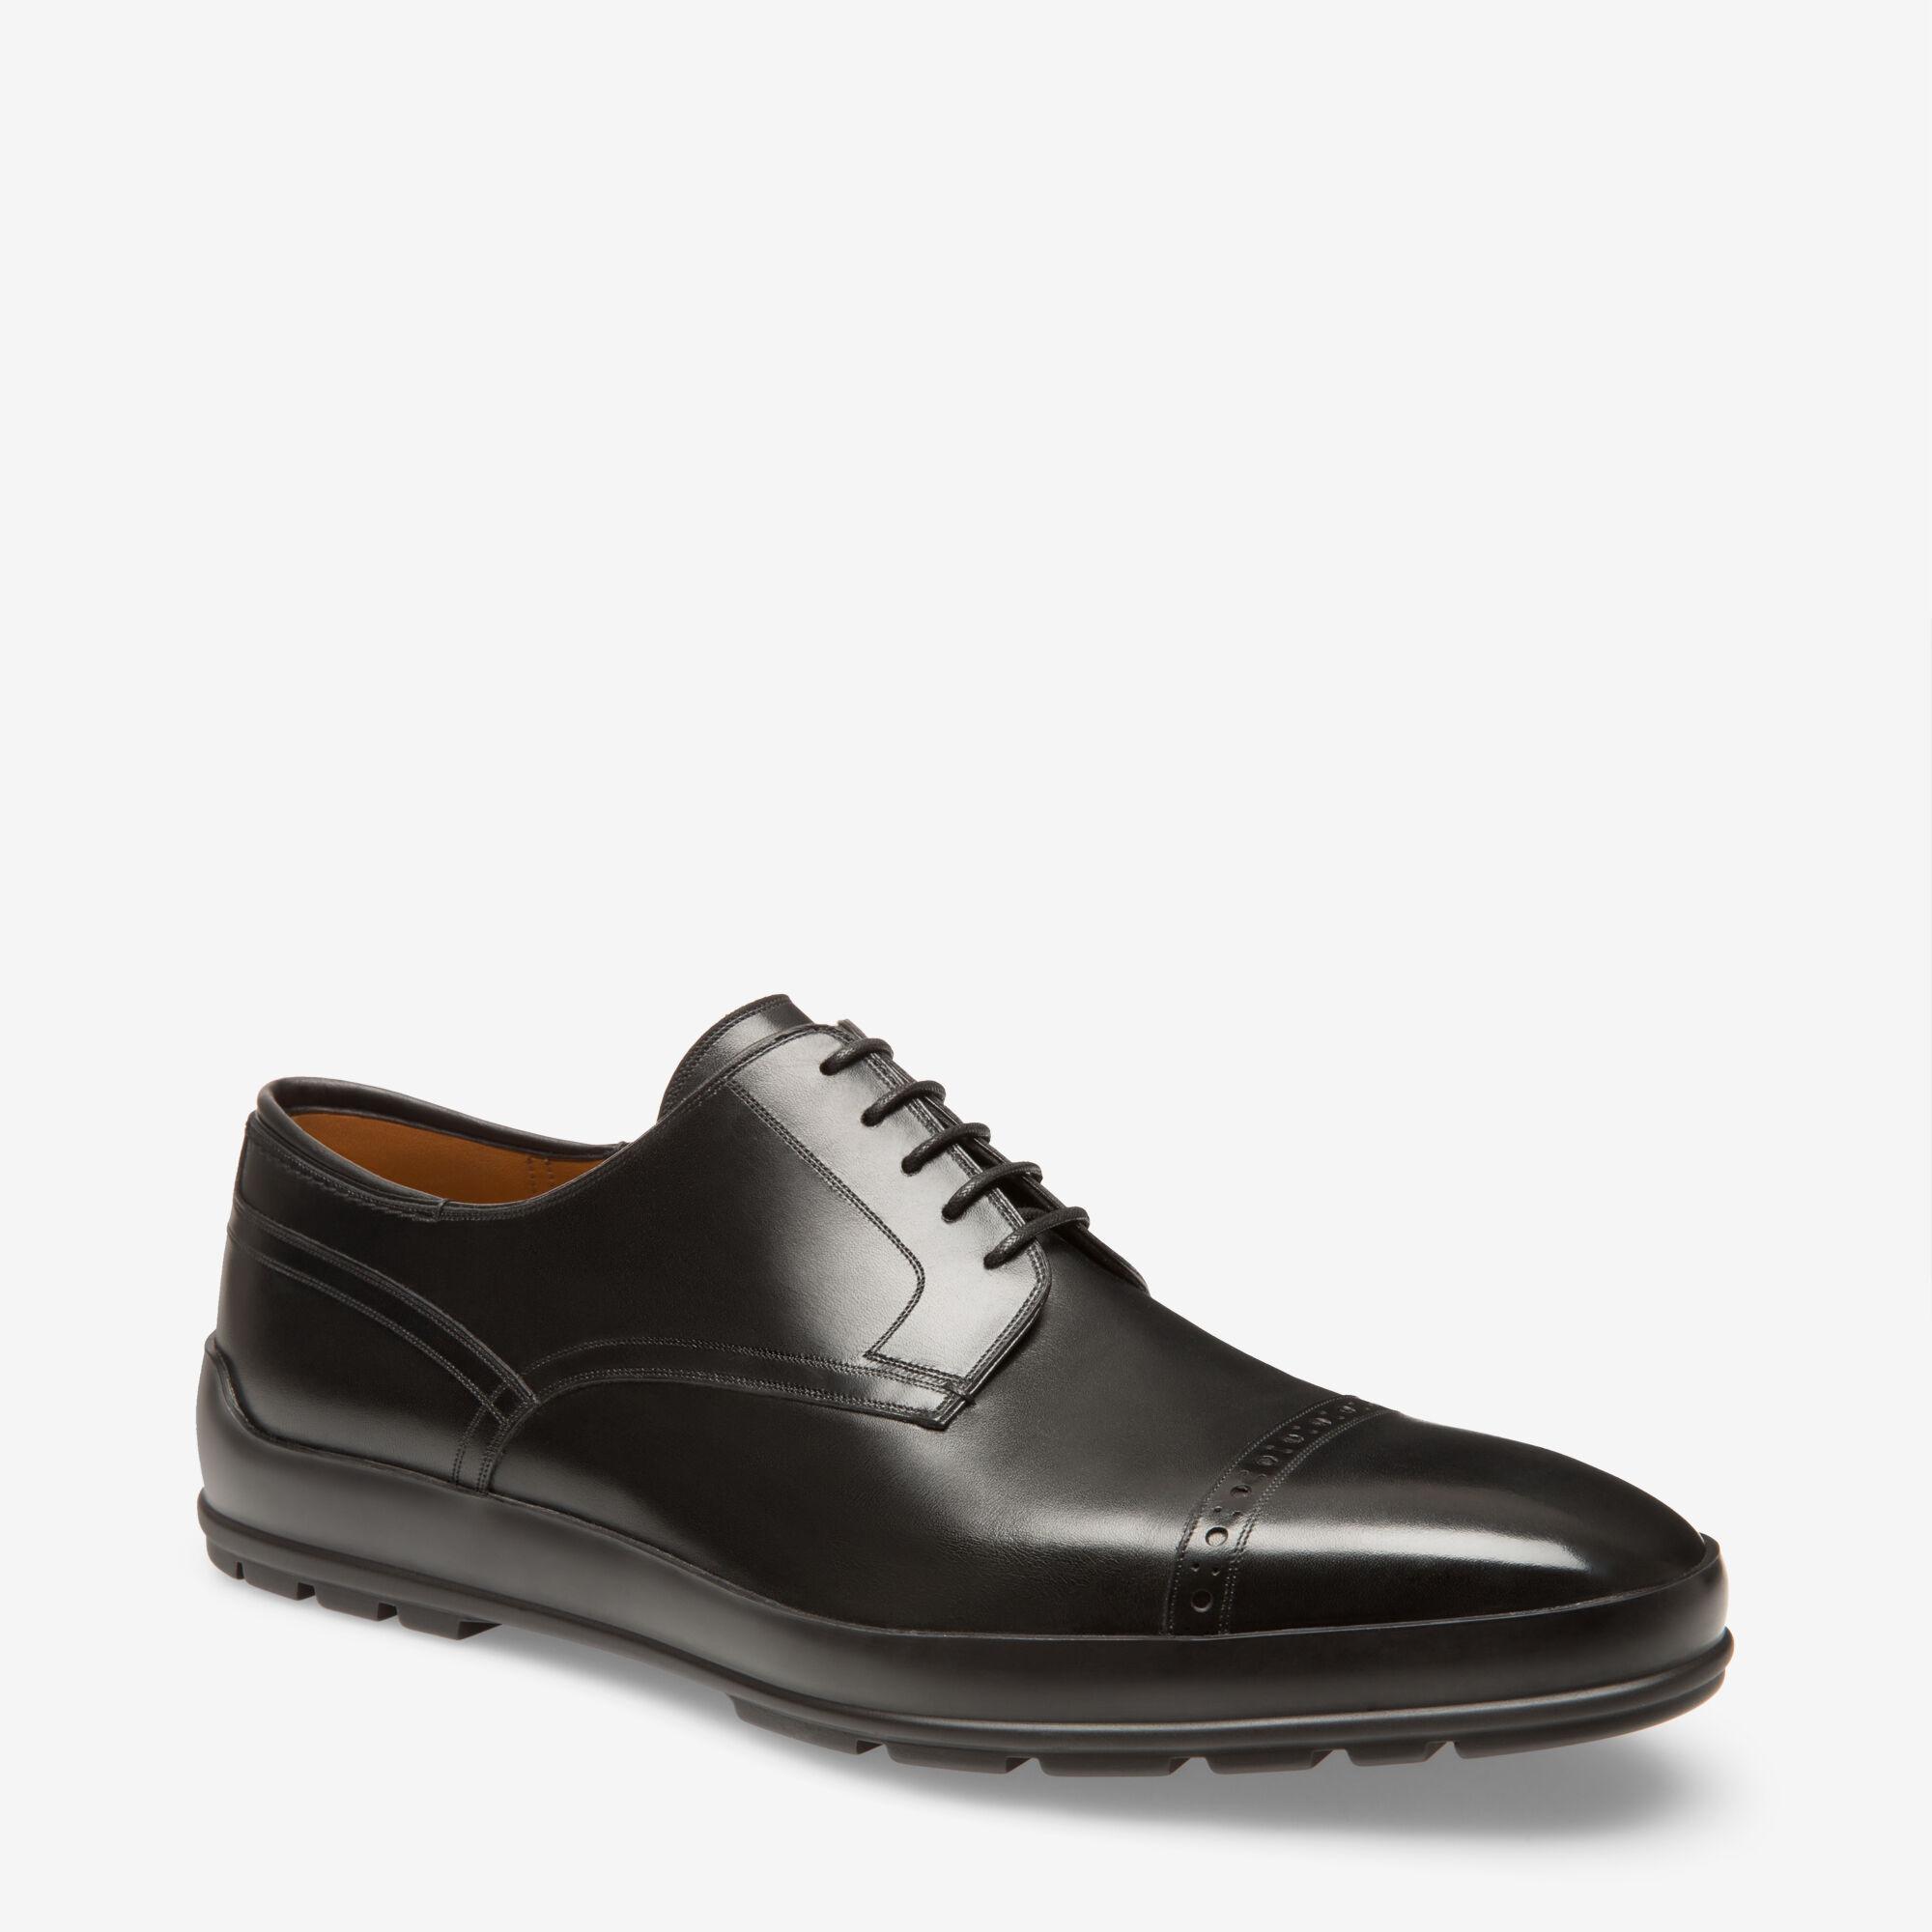 Bally Reigan Shoes Luxembourg, SAVE 32% - pacificlanding.ca